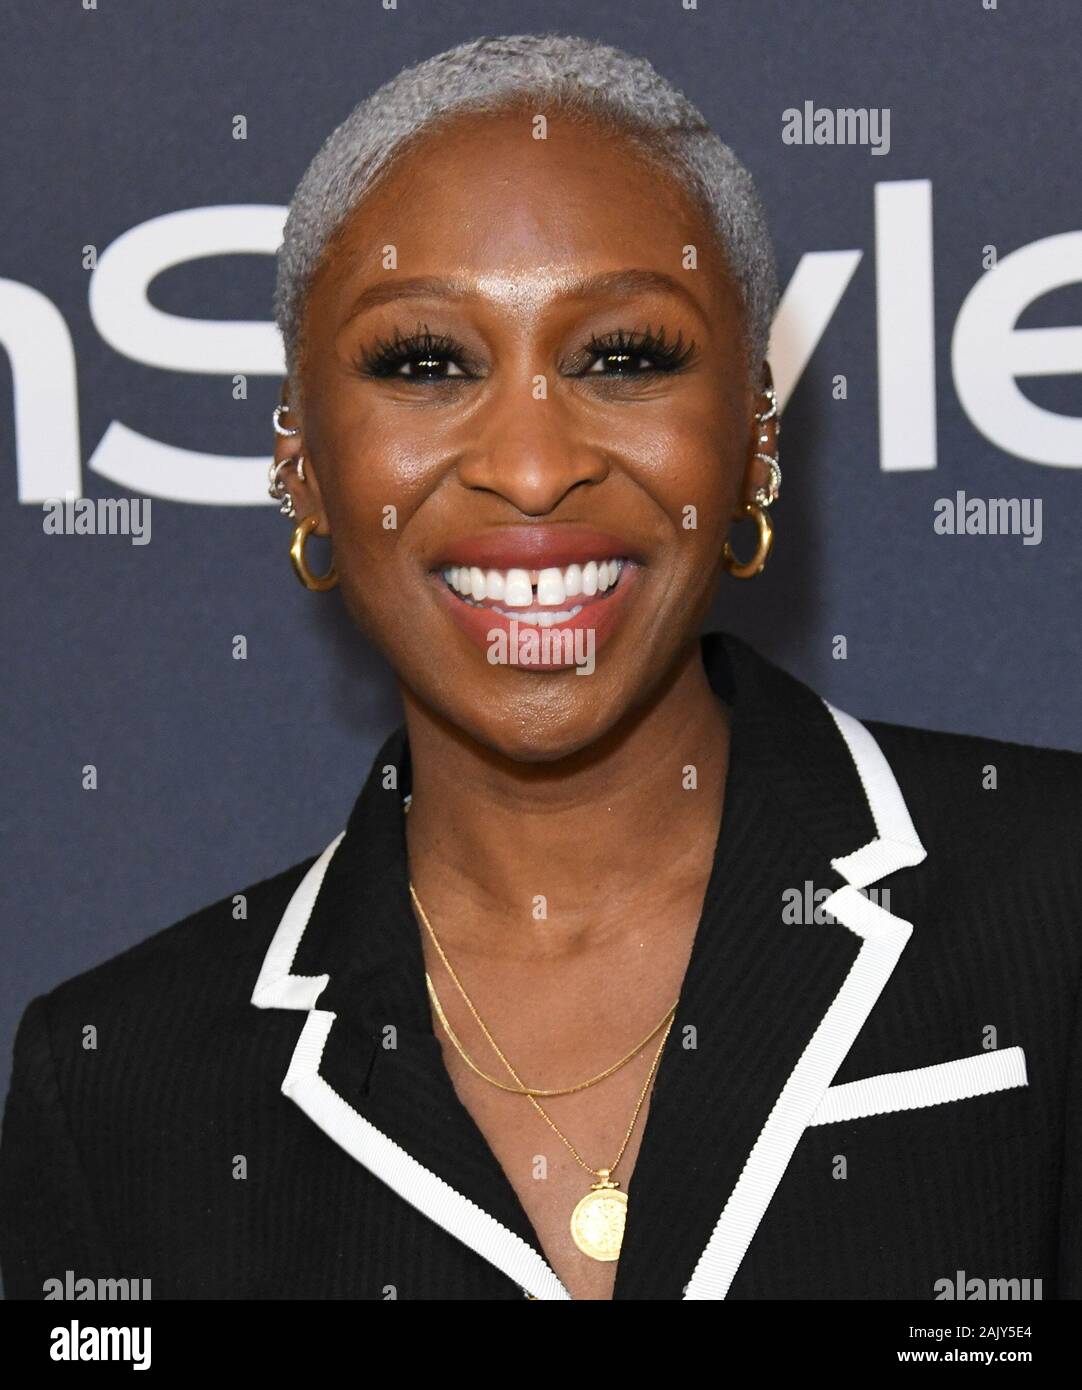 Beverly Hills, California, USA. 05 January 2020 - Beverly Hills, California - Cynthia Erivo. 21st Annual InStyle and Warner Bros. Golden Globes After Party held at Beverly Hilton Hotel. Photo Credit: Birdie Thompson/AdMedia /MediaPunch Credit: MediaPunch Inc/Alamy Live News Stock Photo